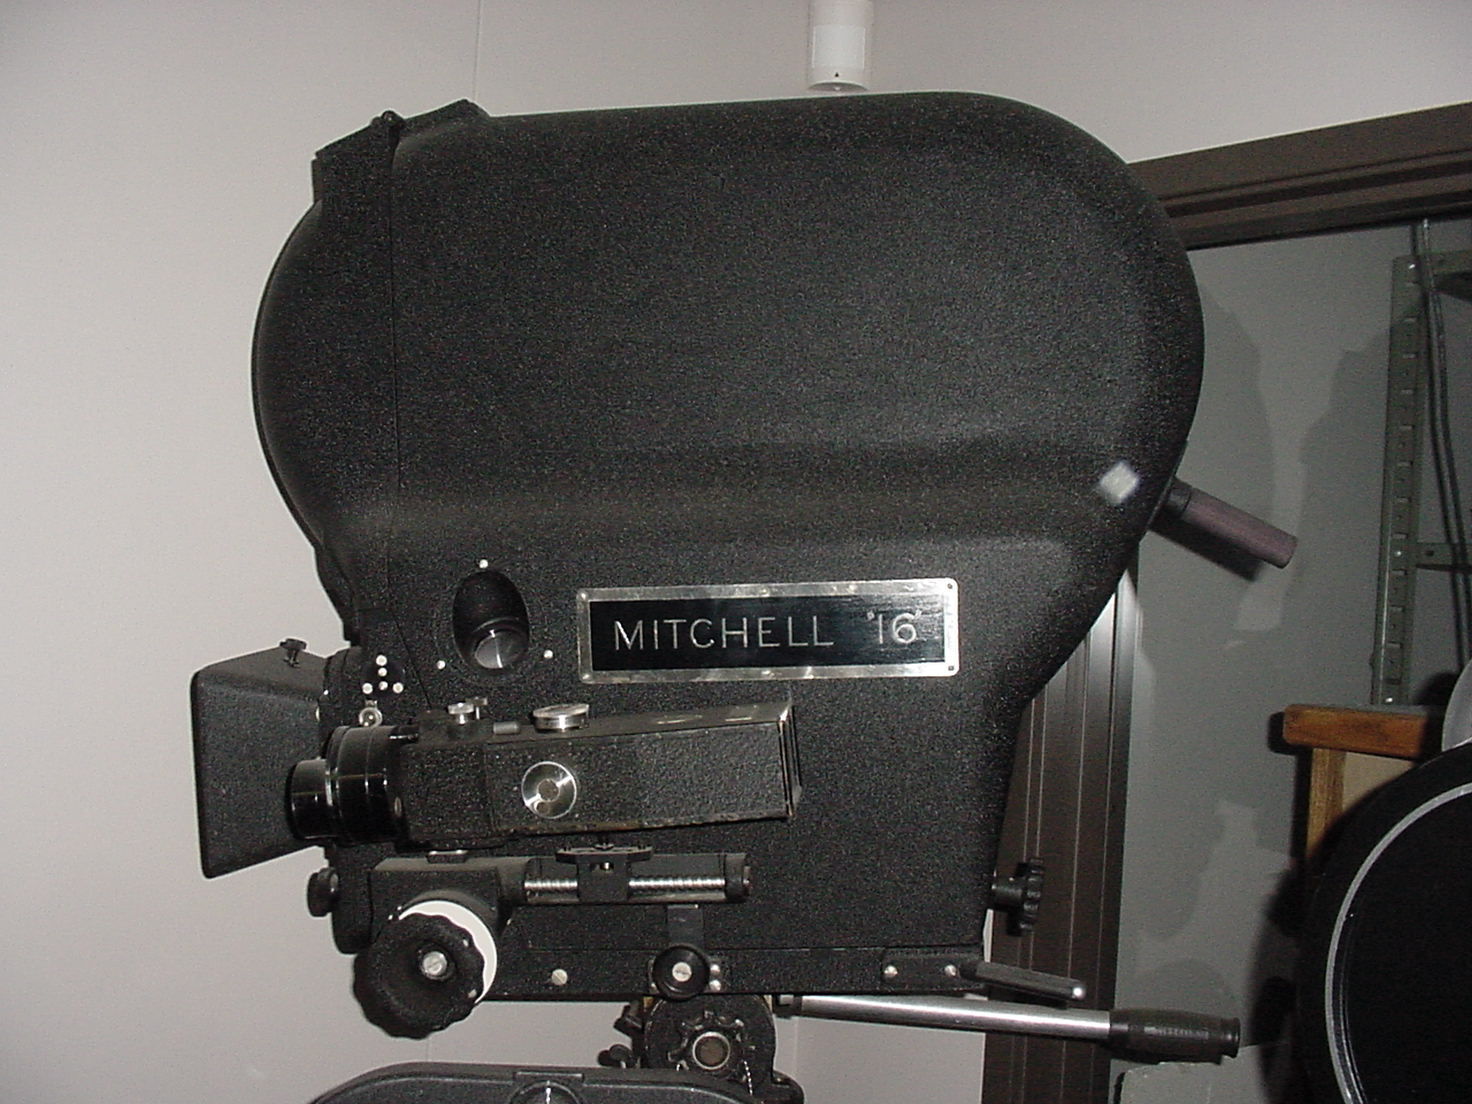 CINEMA ANTIQUES: OLD MOVIE CAMs, STUDIO LITES, MICS Etc FOR HOME / OFFICE. OFFER